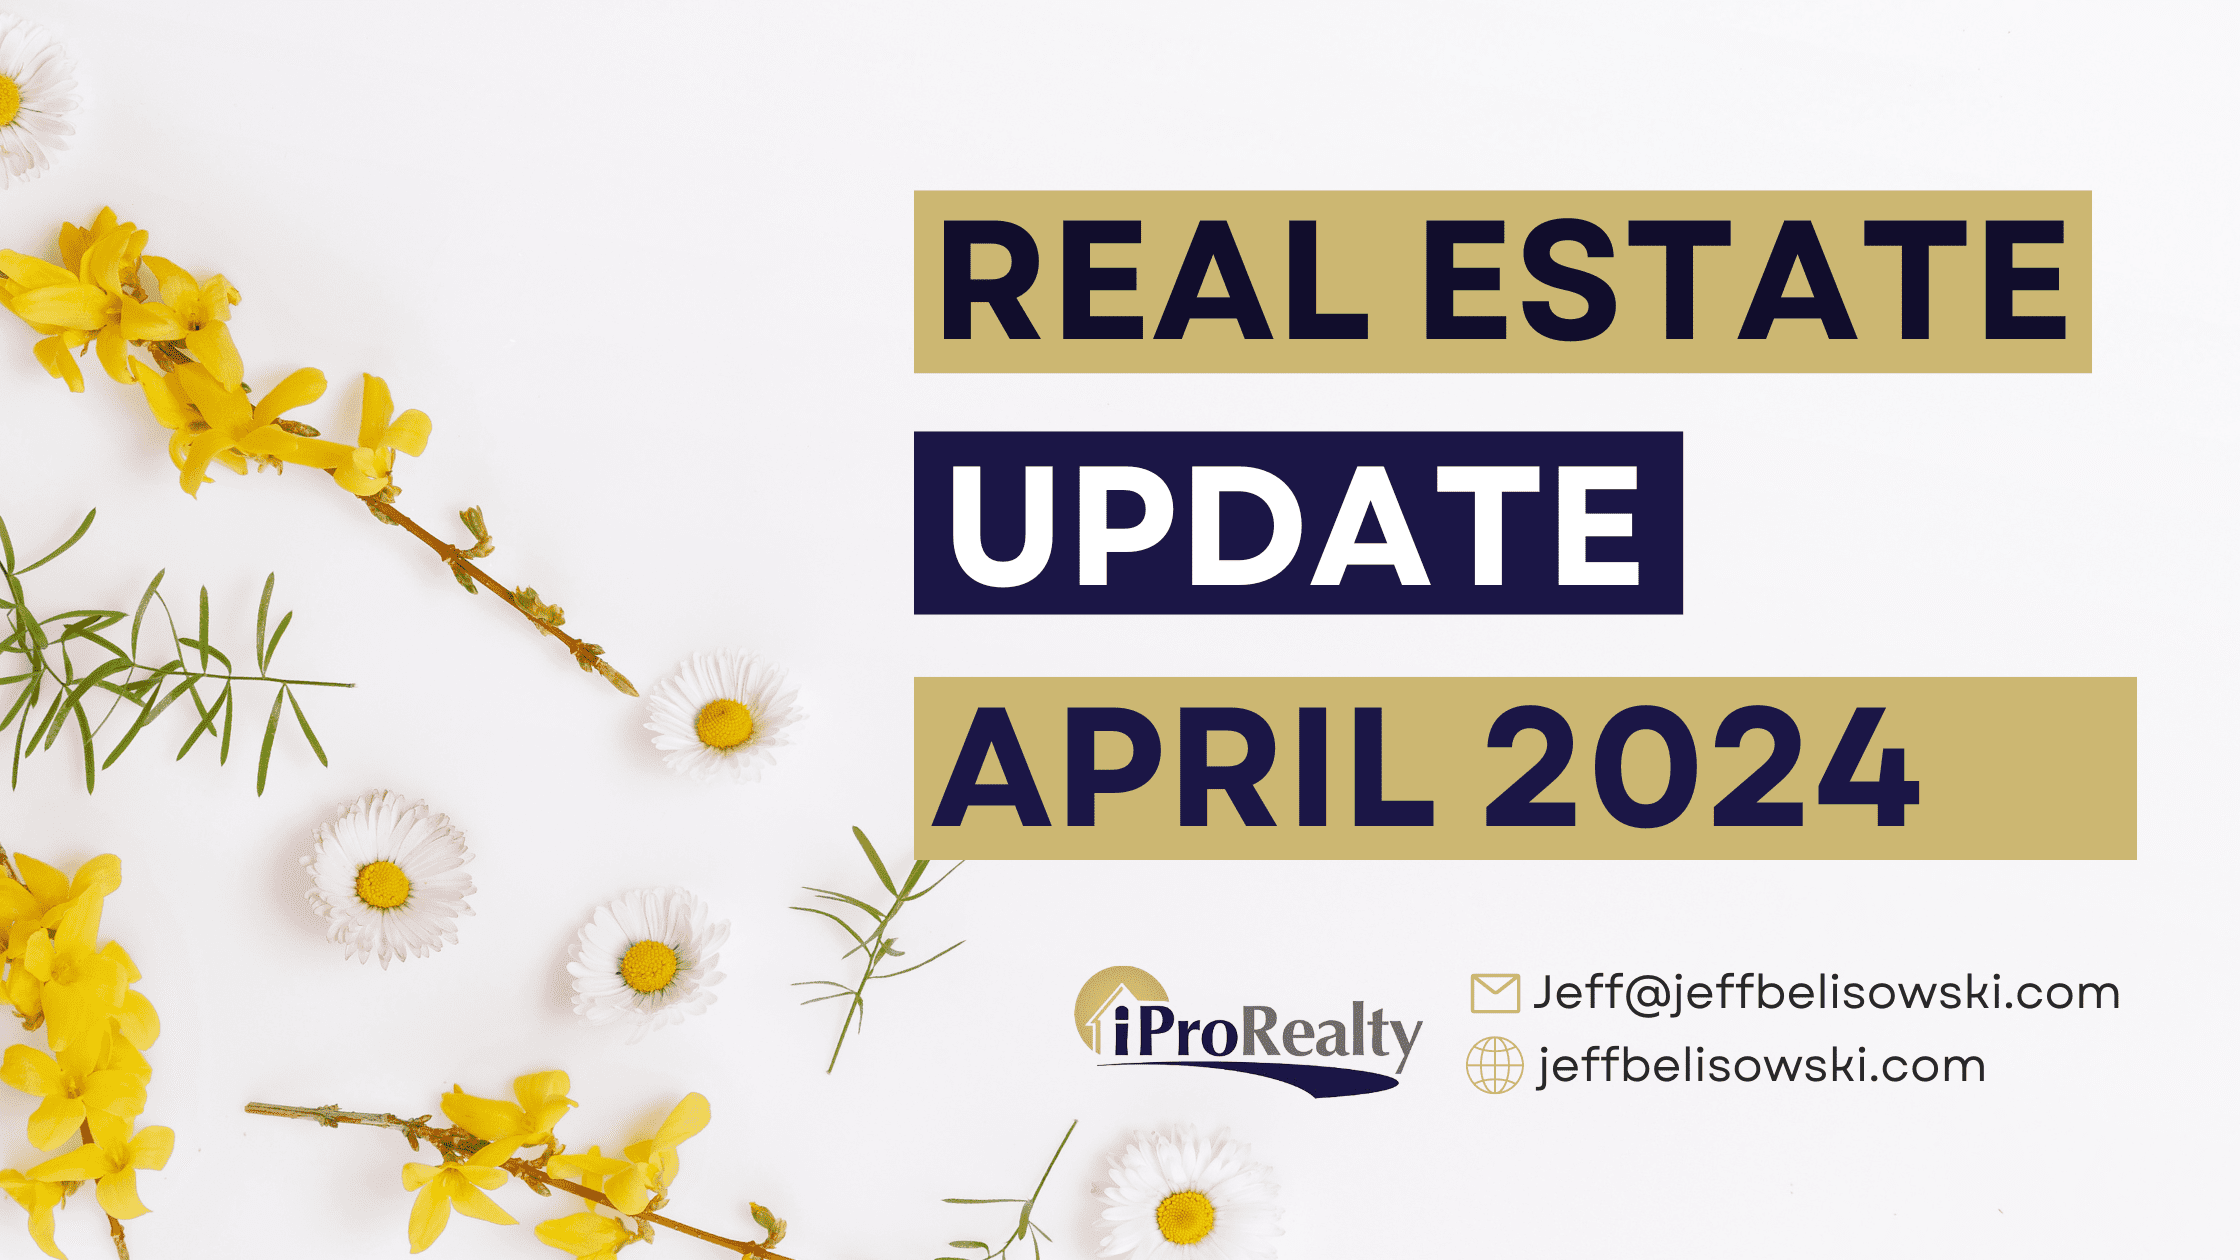 Your Real Estate Update – April 2024